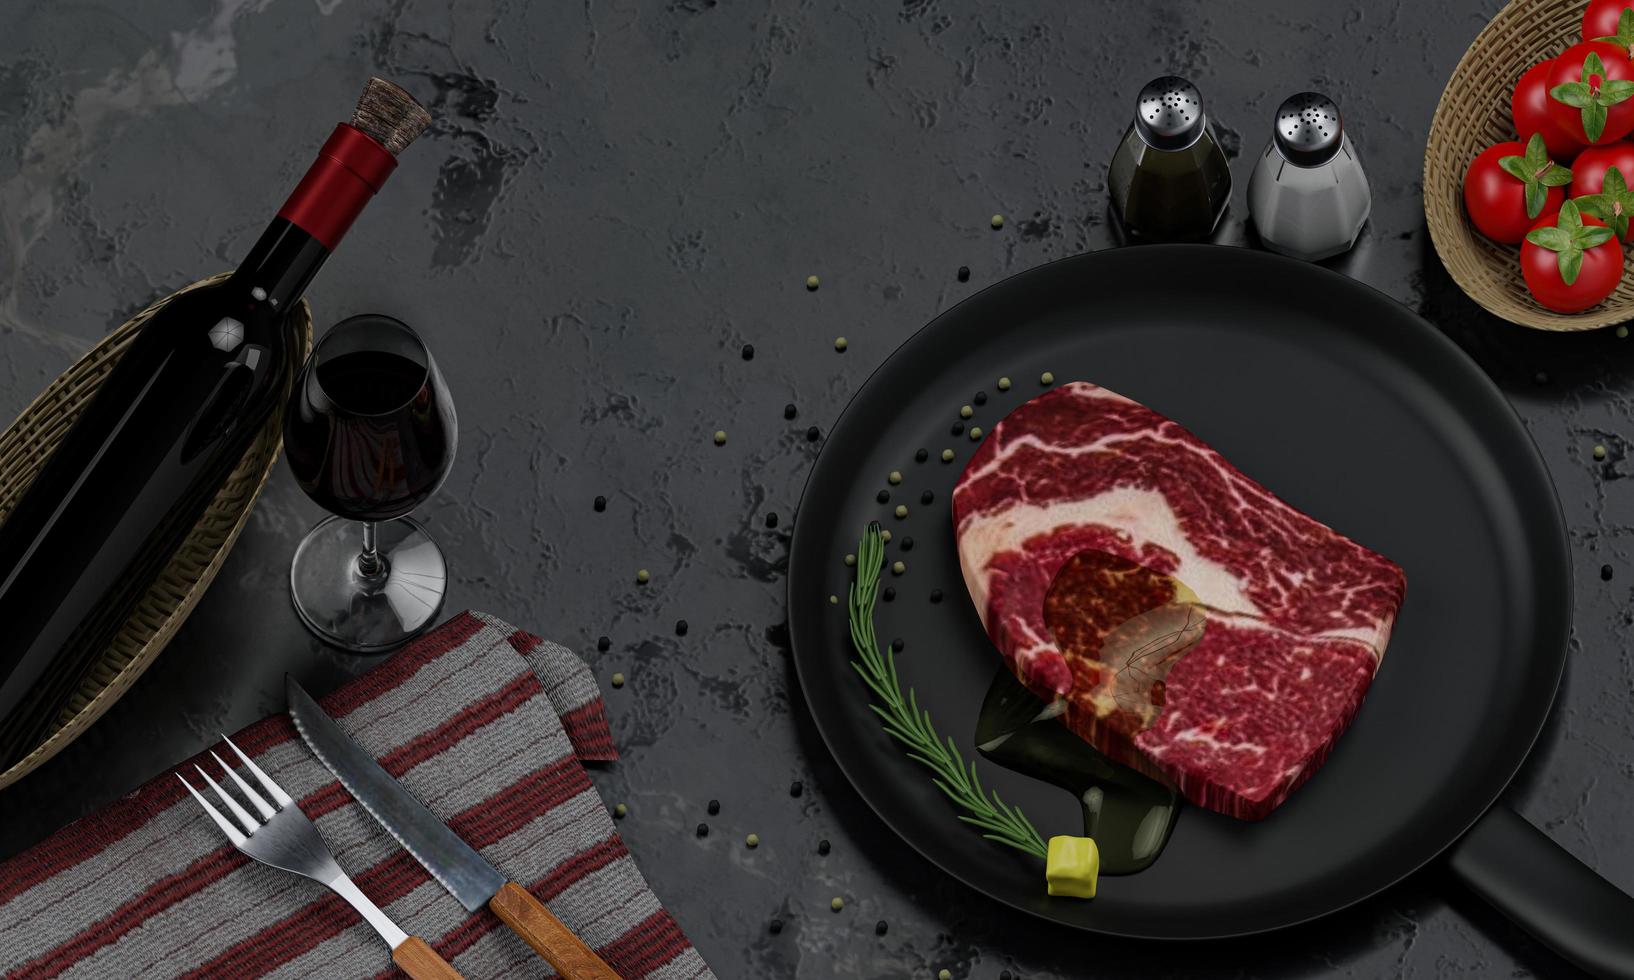 Fresh beef for steaks With olive oil on top Place on a Teflon pan. Seasoning of white pepper and black pepper, decorated with cherry tomatoes. Black Marble Table There is a knife and fork. photo